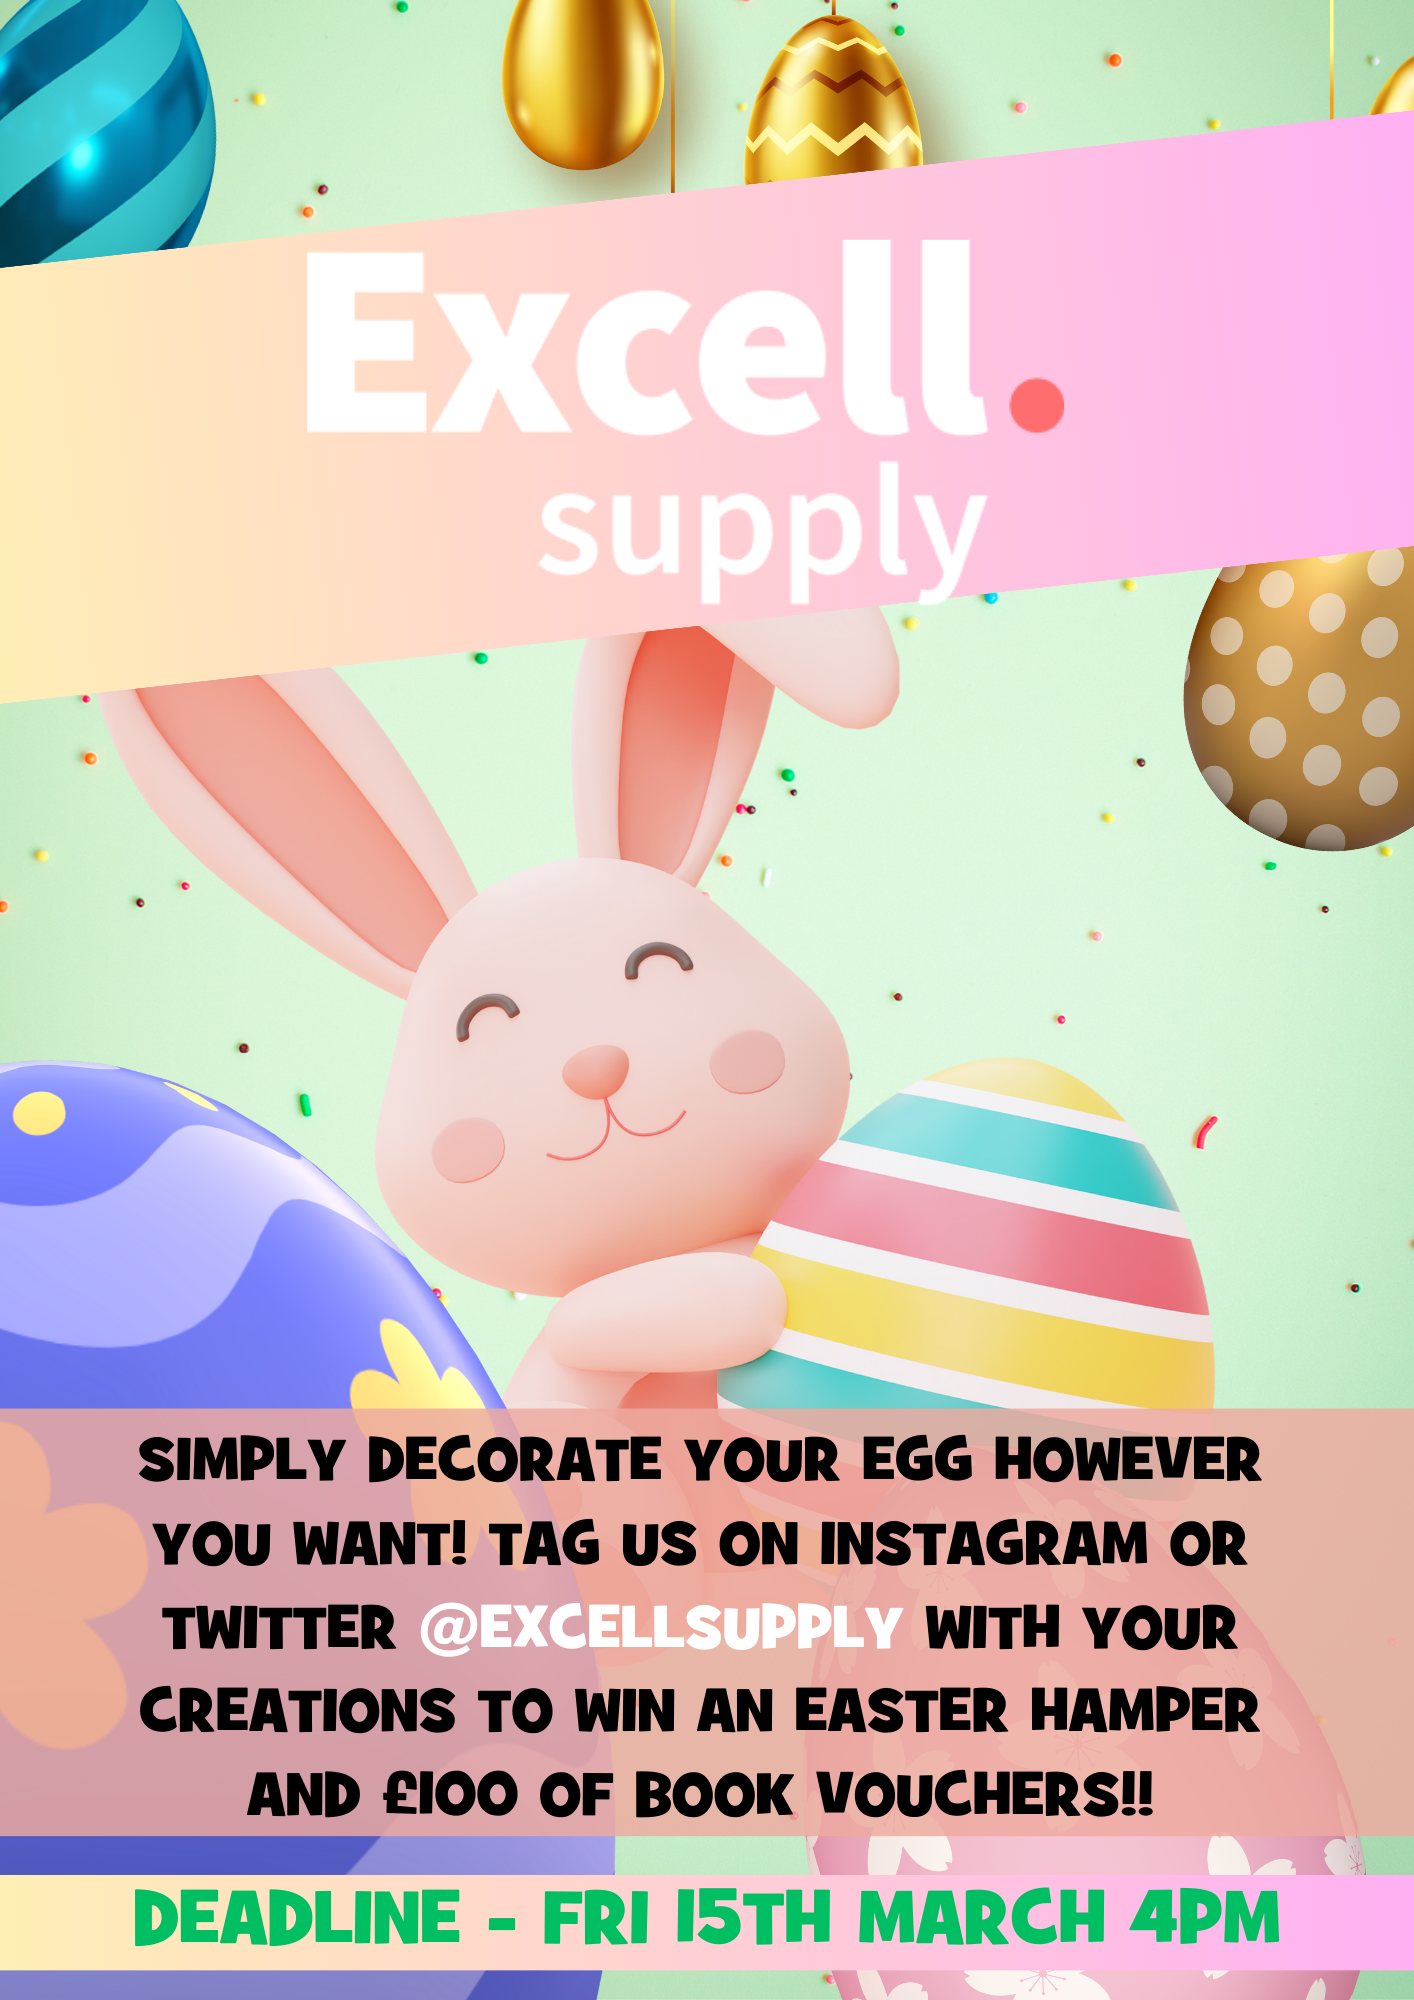 pink cartoon Easter bunny holding an egg with Easter eggs in the foreground and background with a pink gradient band across the top with the Excell Supply logo.